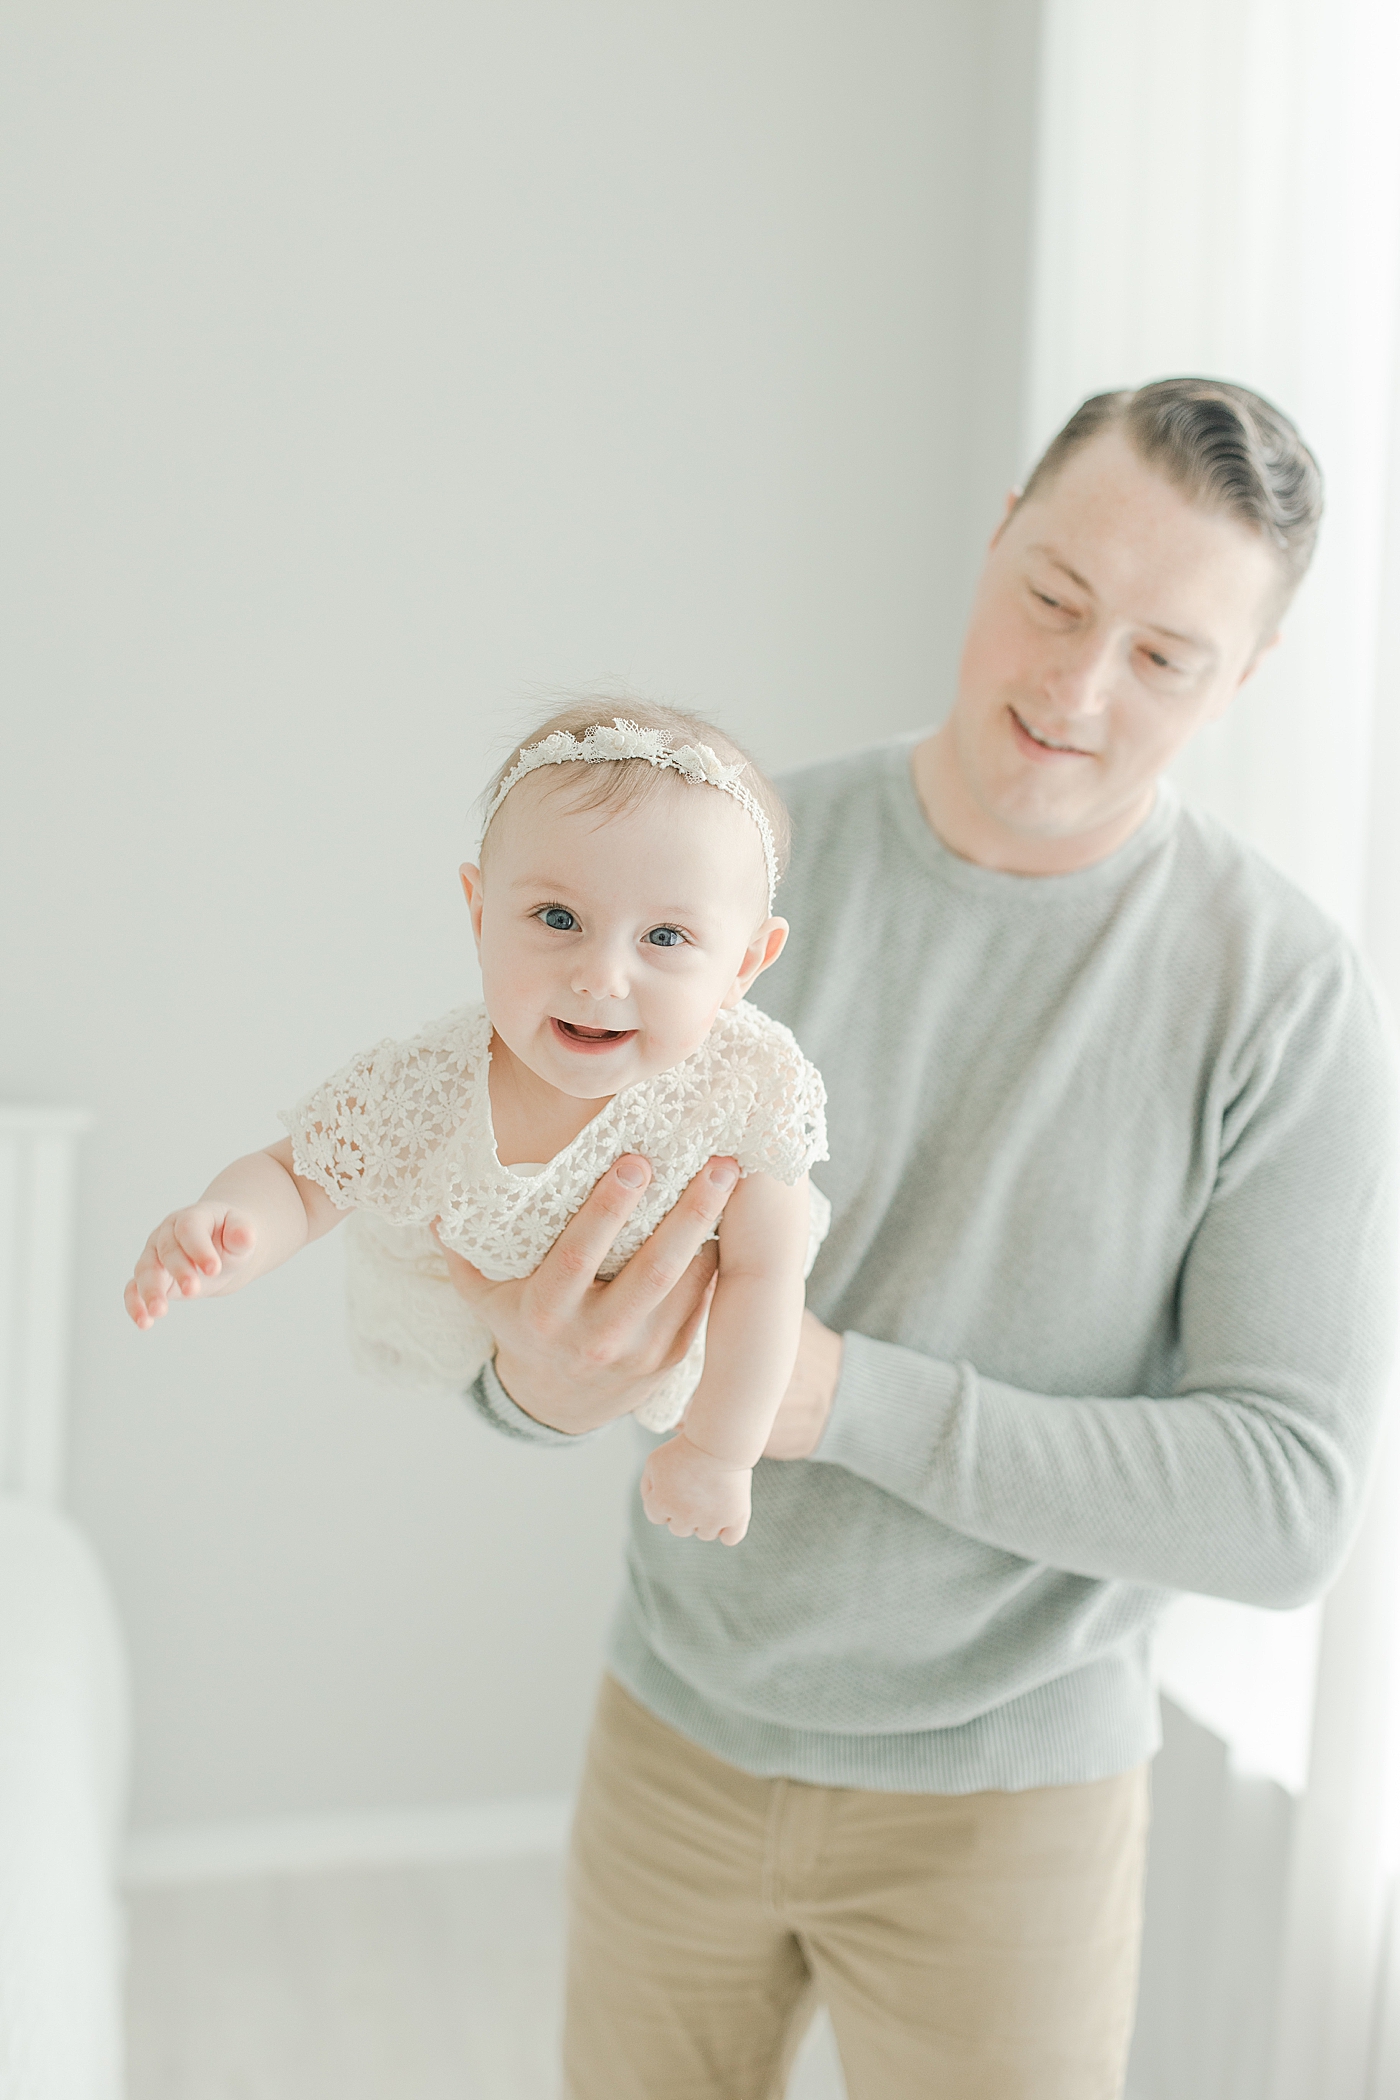 Dad playing with his baby girl | Photo by Little Sunshine Photography